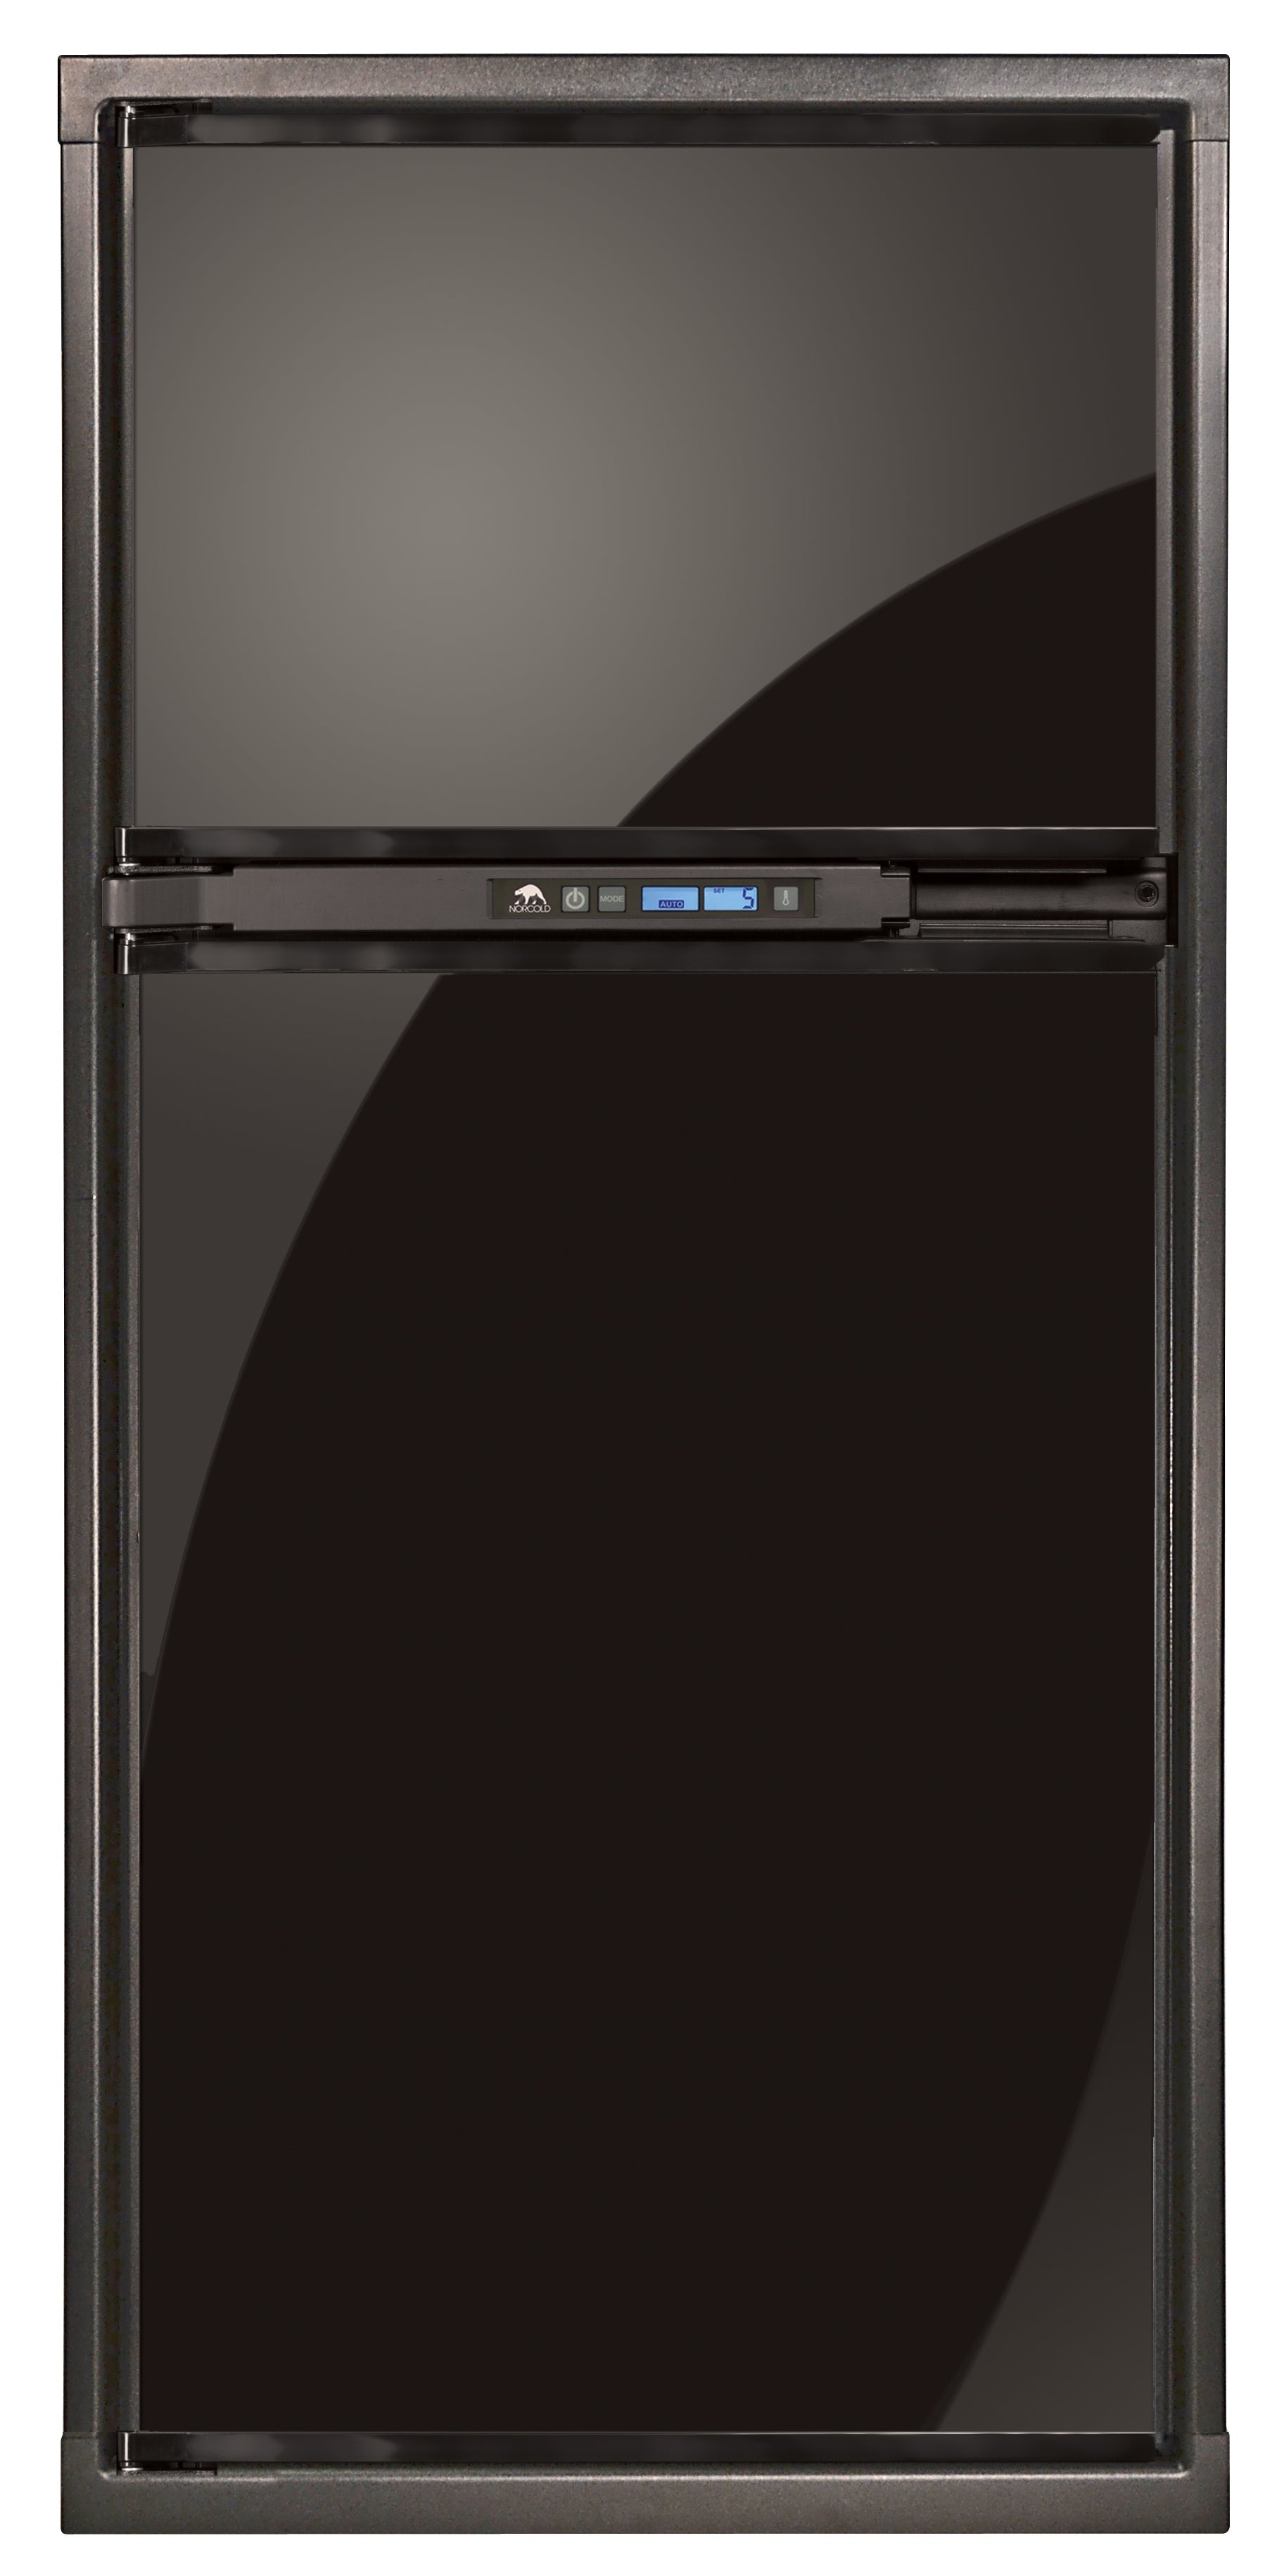 Norcold NA7LXR Dual Compartment 2 Door Refrigerator With Freezer - N6DNA7LXR